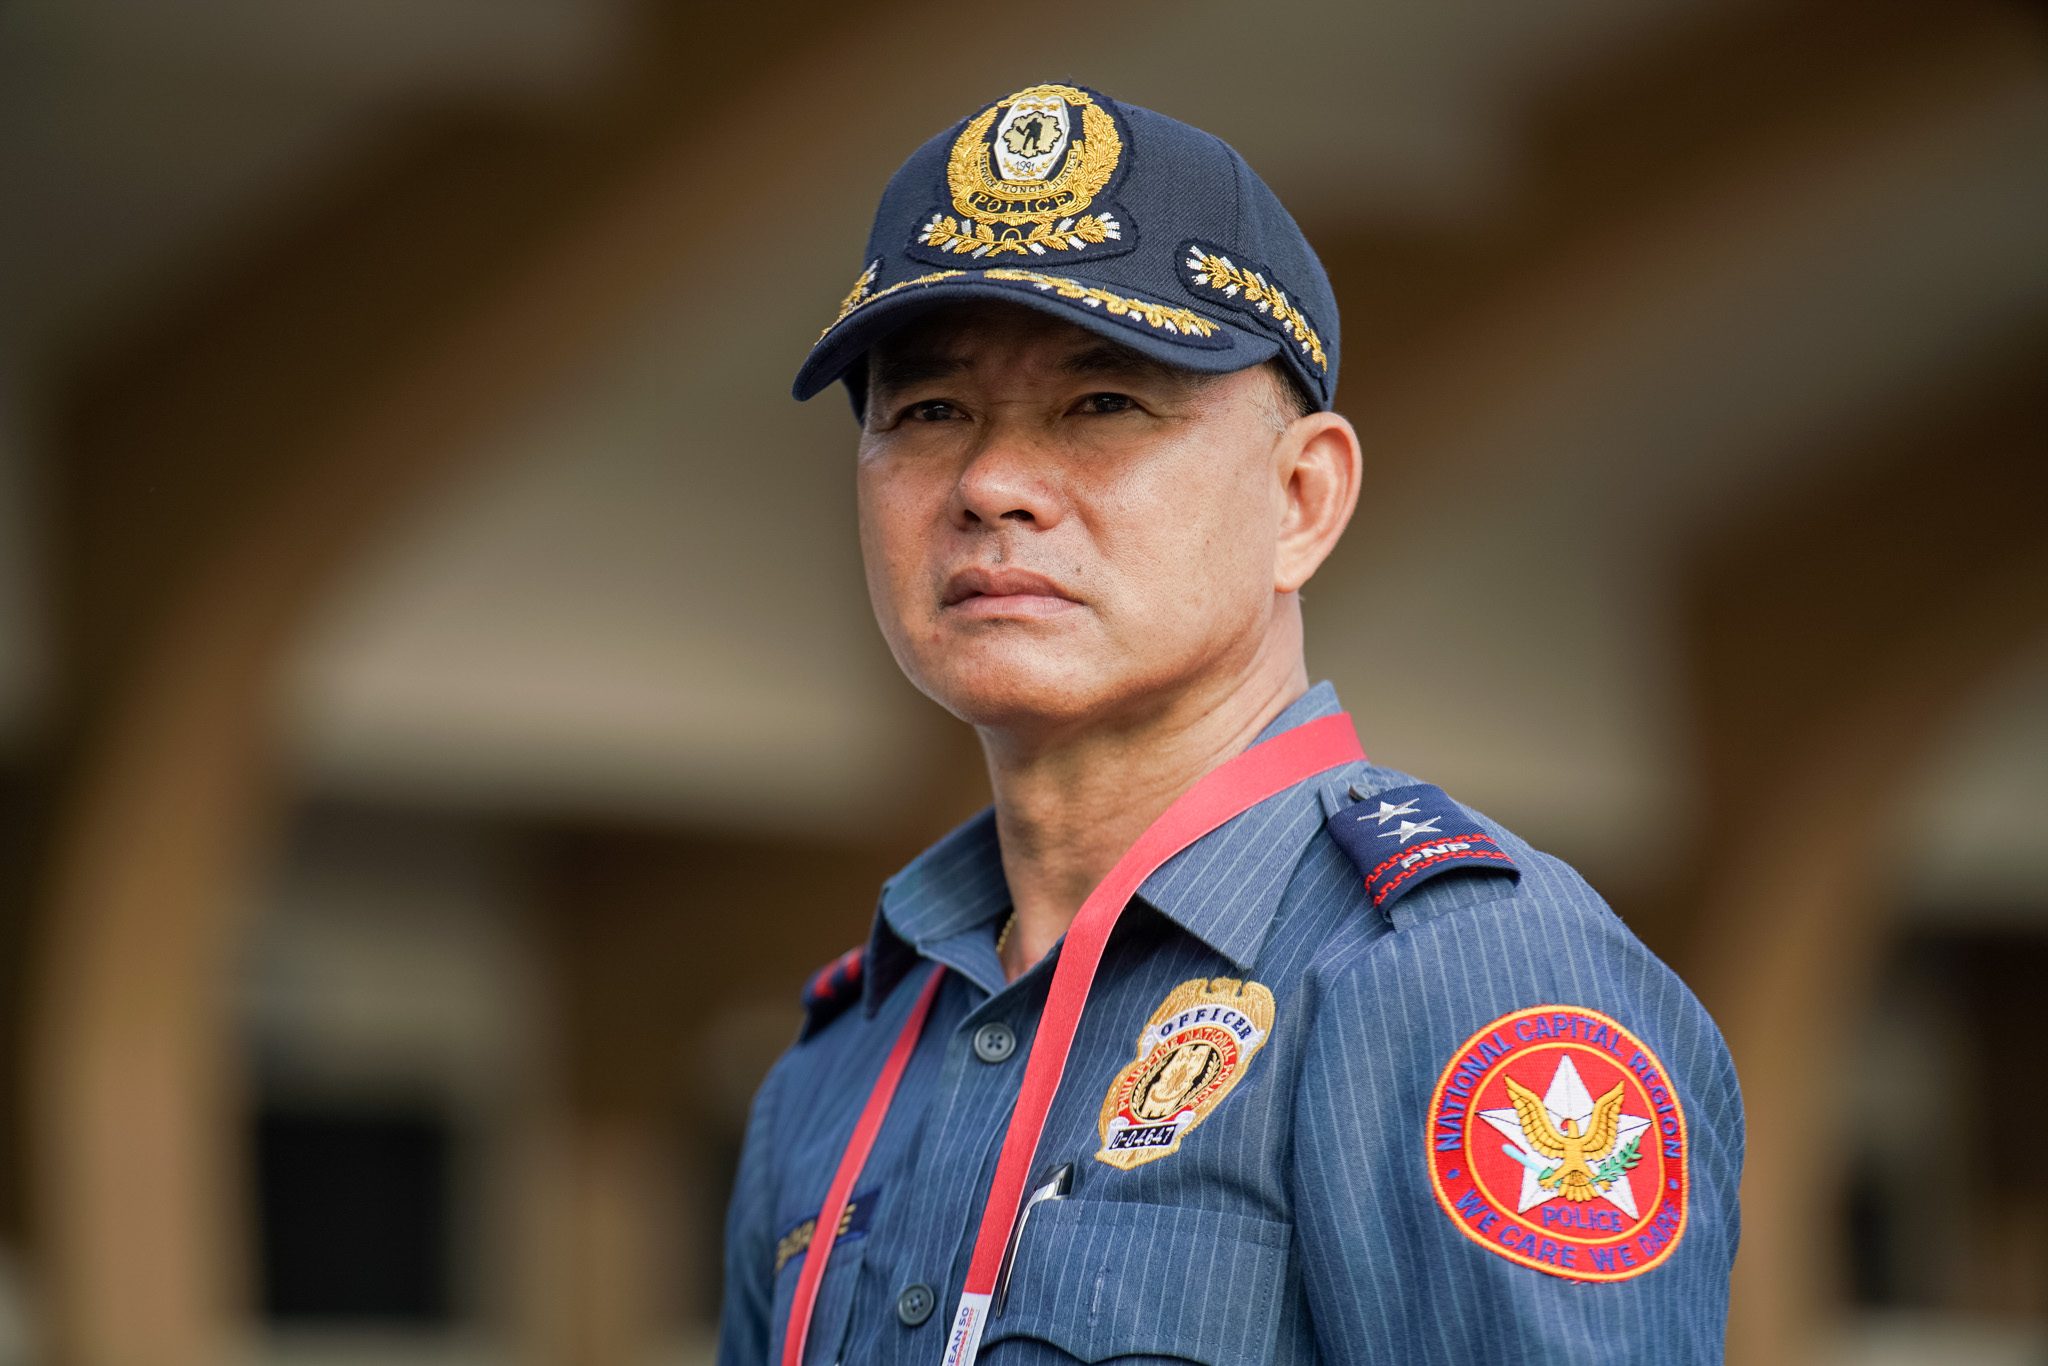 Kian a ‘drug runner’? Possible, but probe focusing on EJK angle – NCRPO